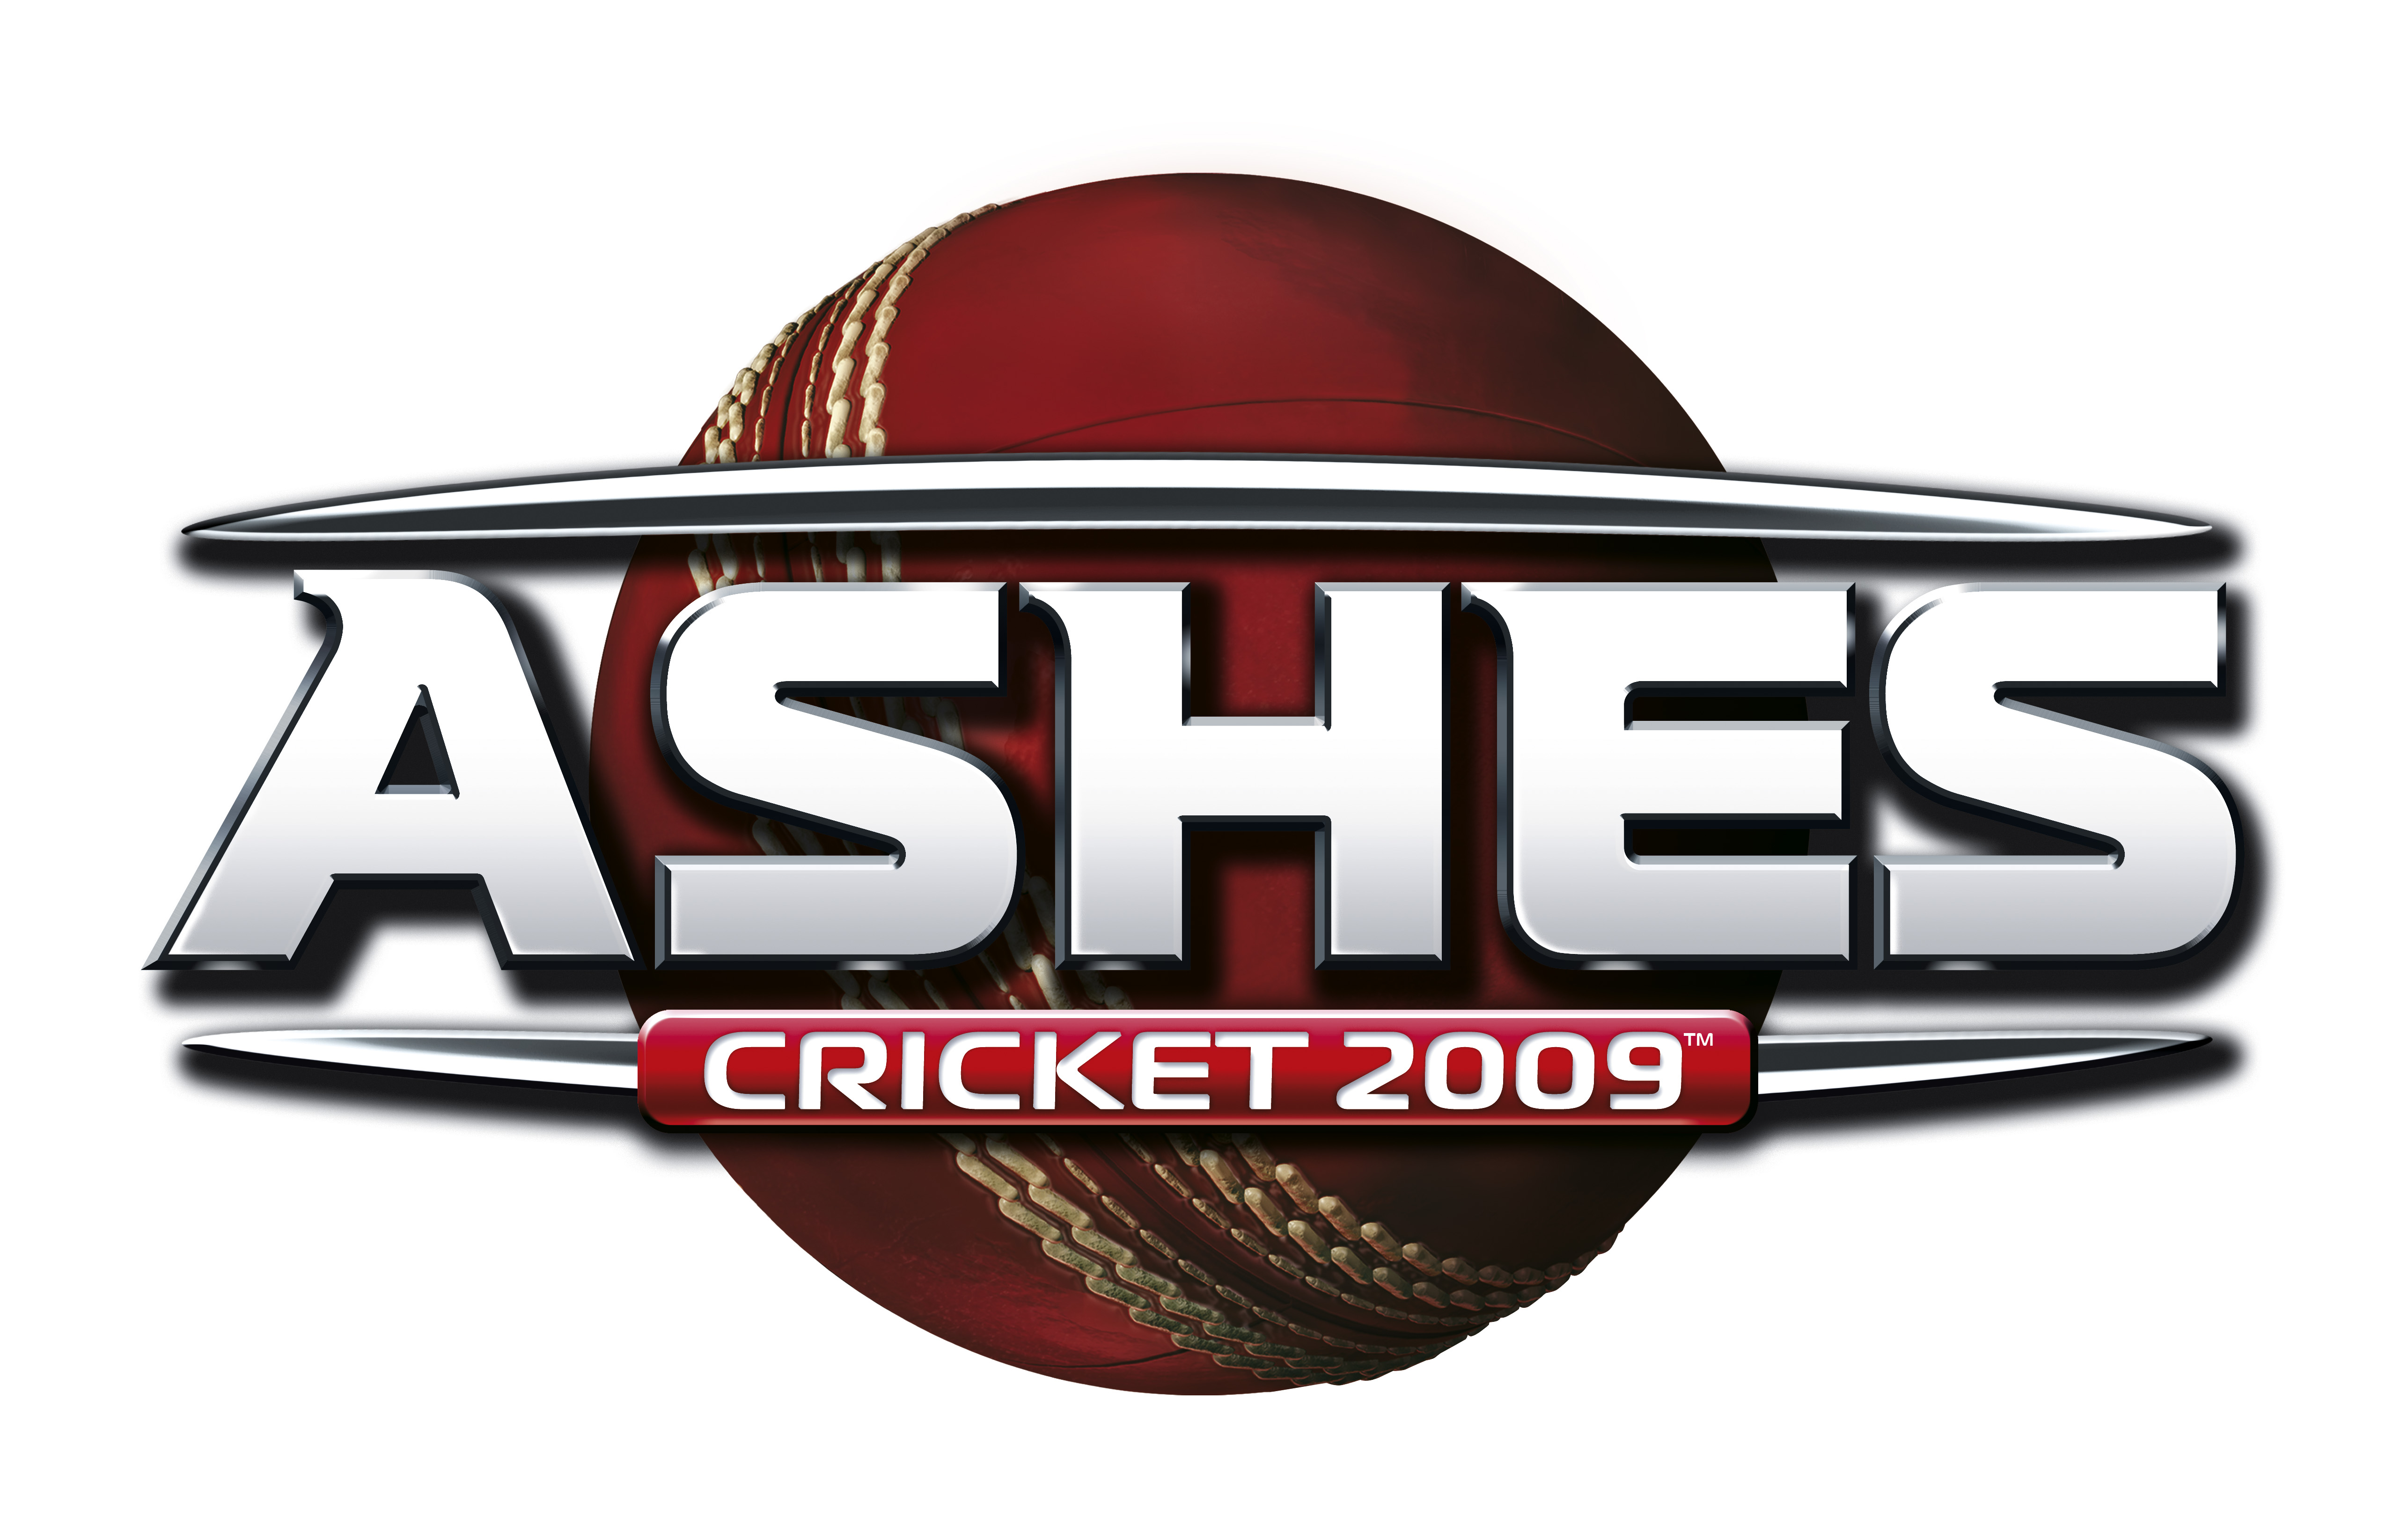 The Ashes Cricket 2009 